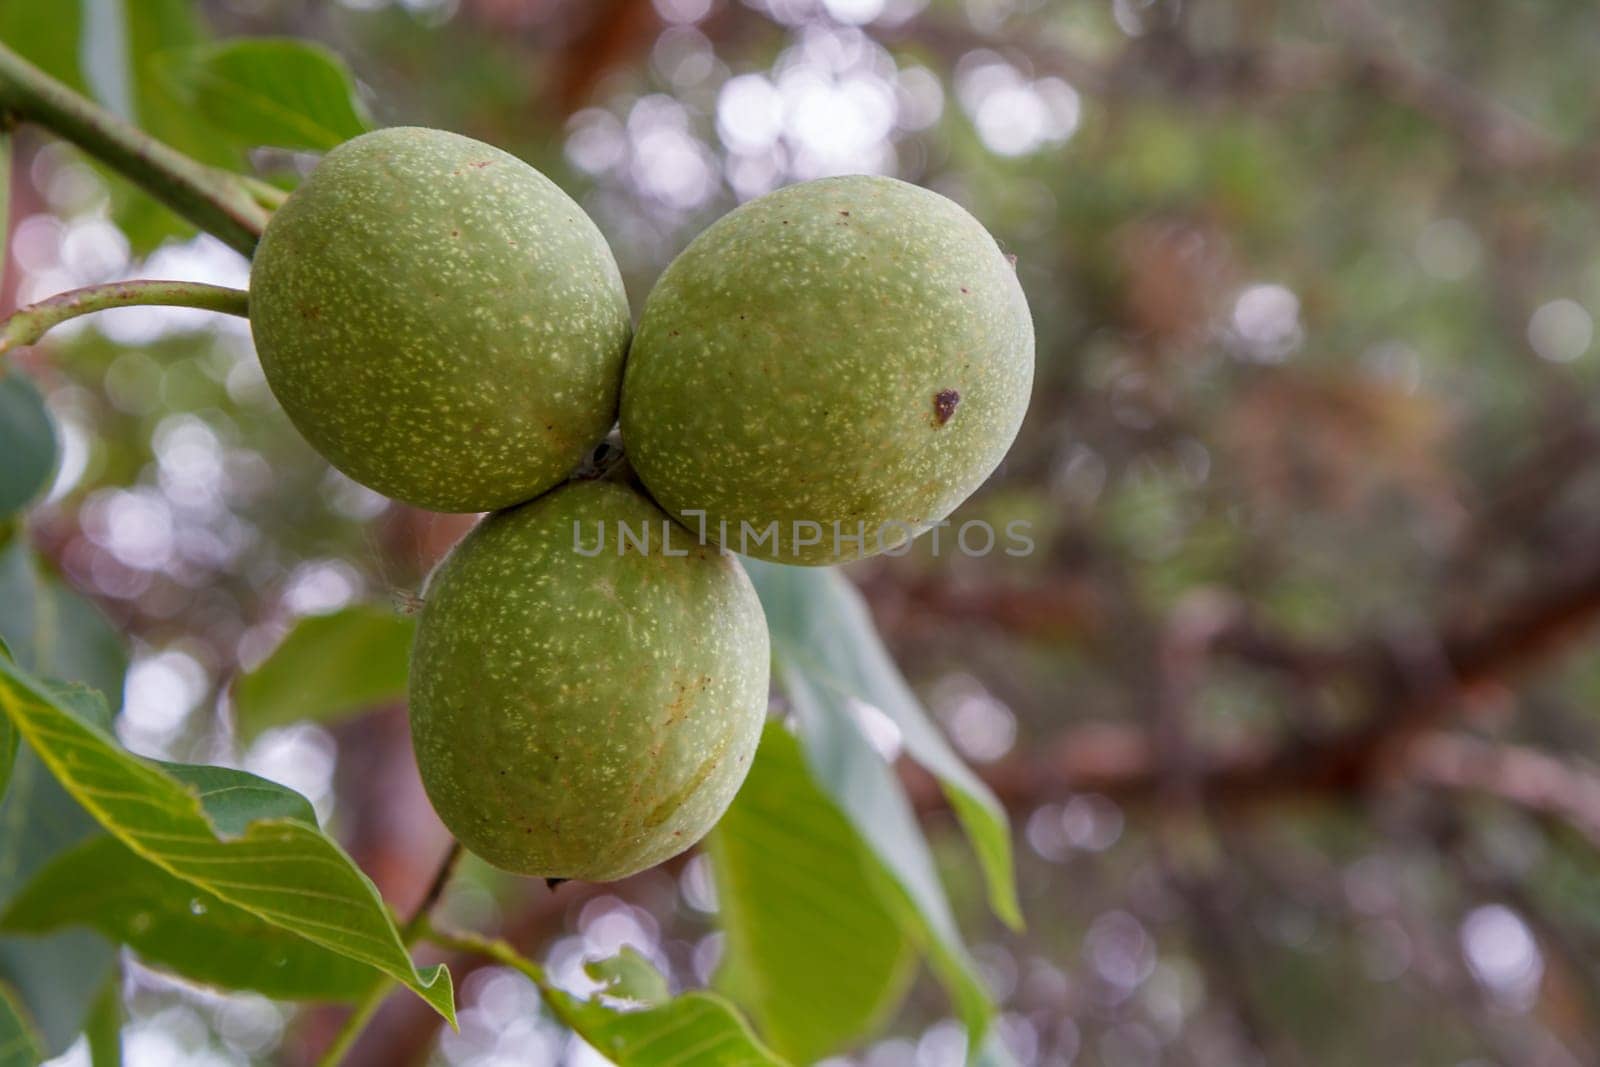 Close-up view of green unripe walnuts on a tree with an orchard on the blurred background.